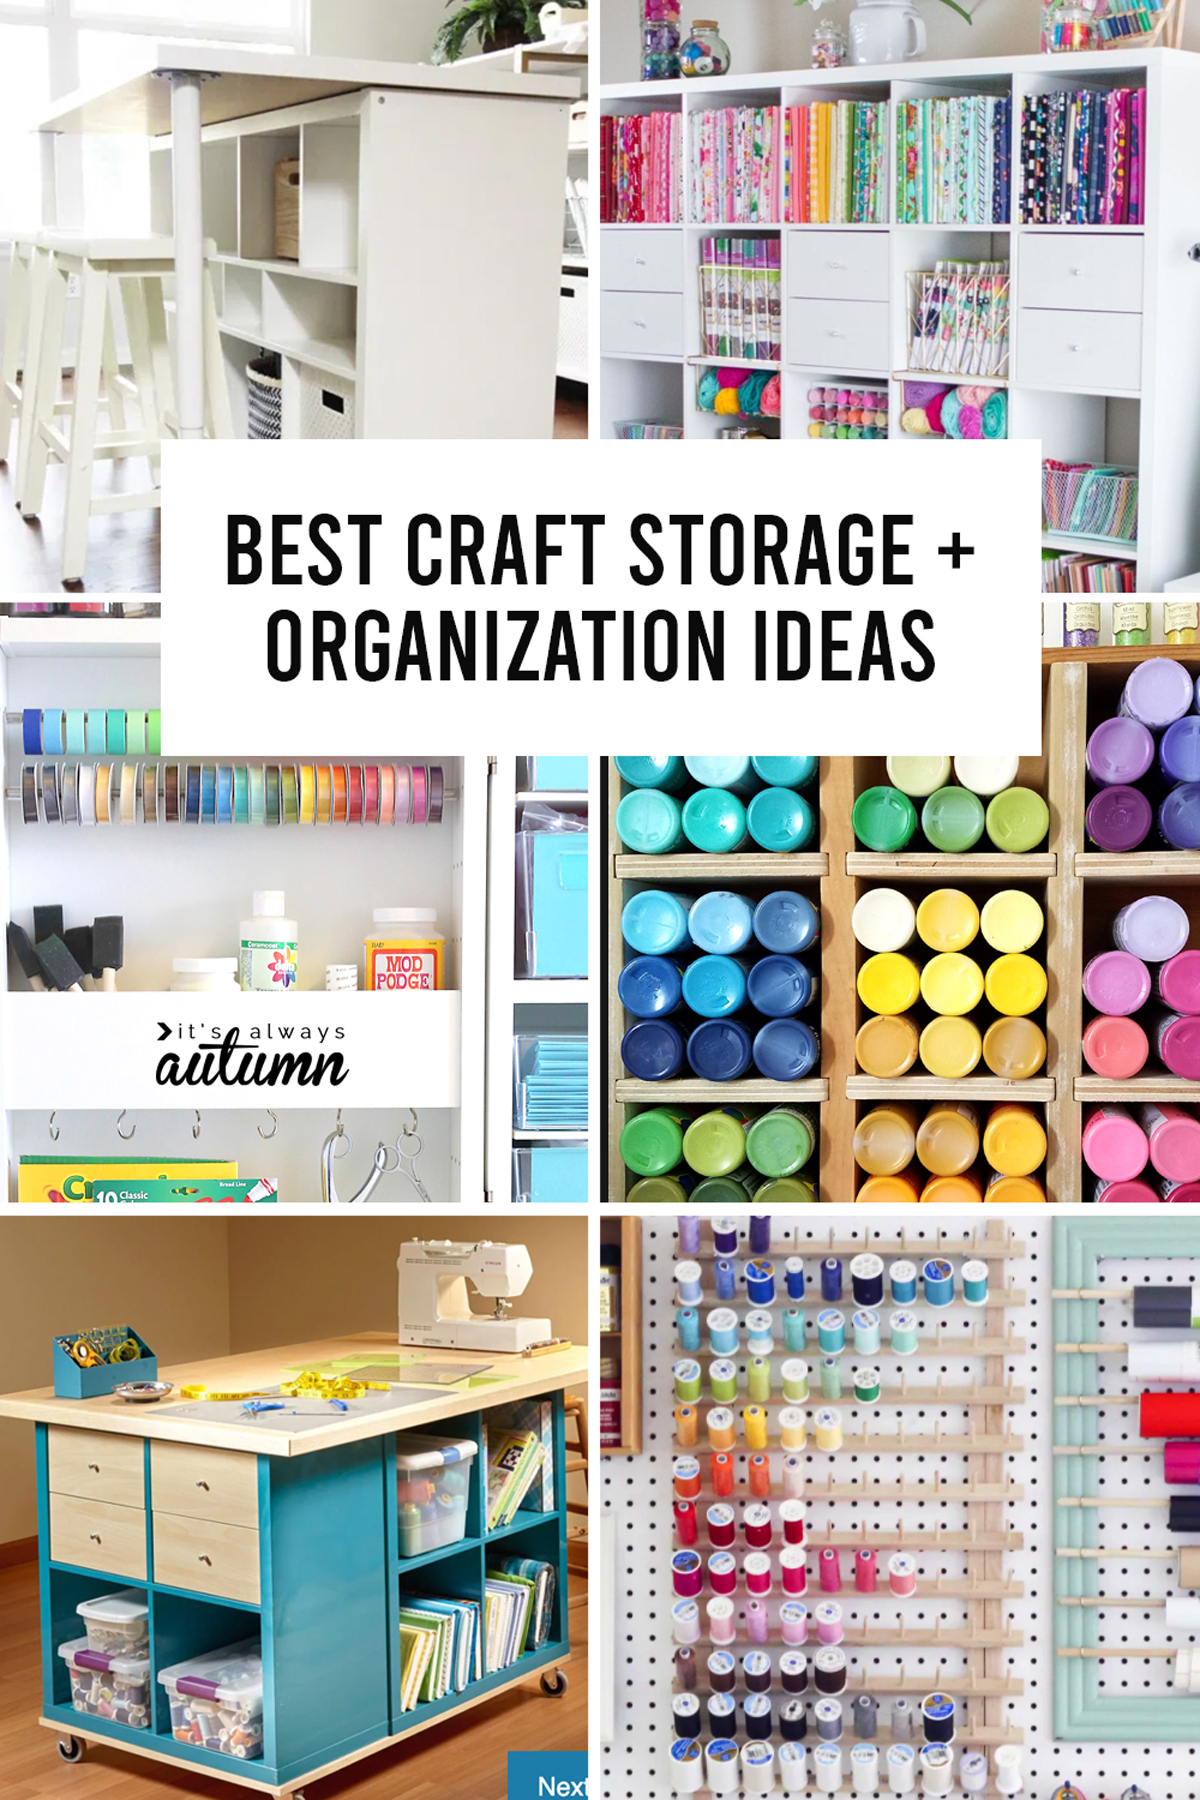 Organize your craft supplies with these hanging storage solutions